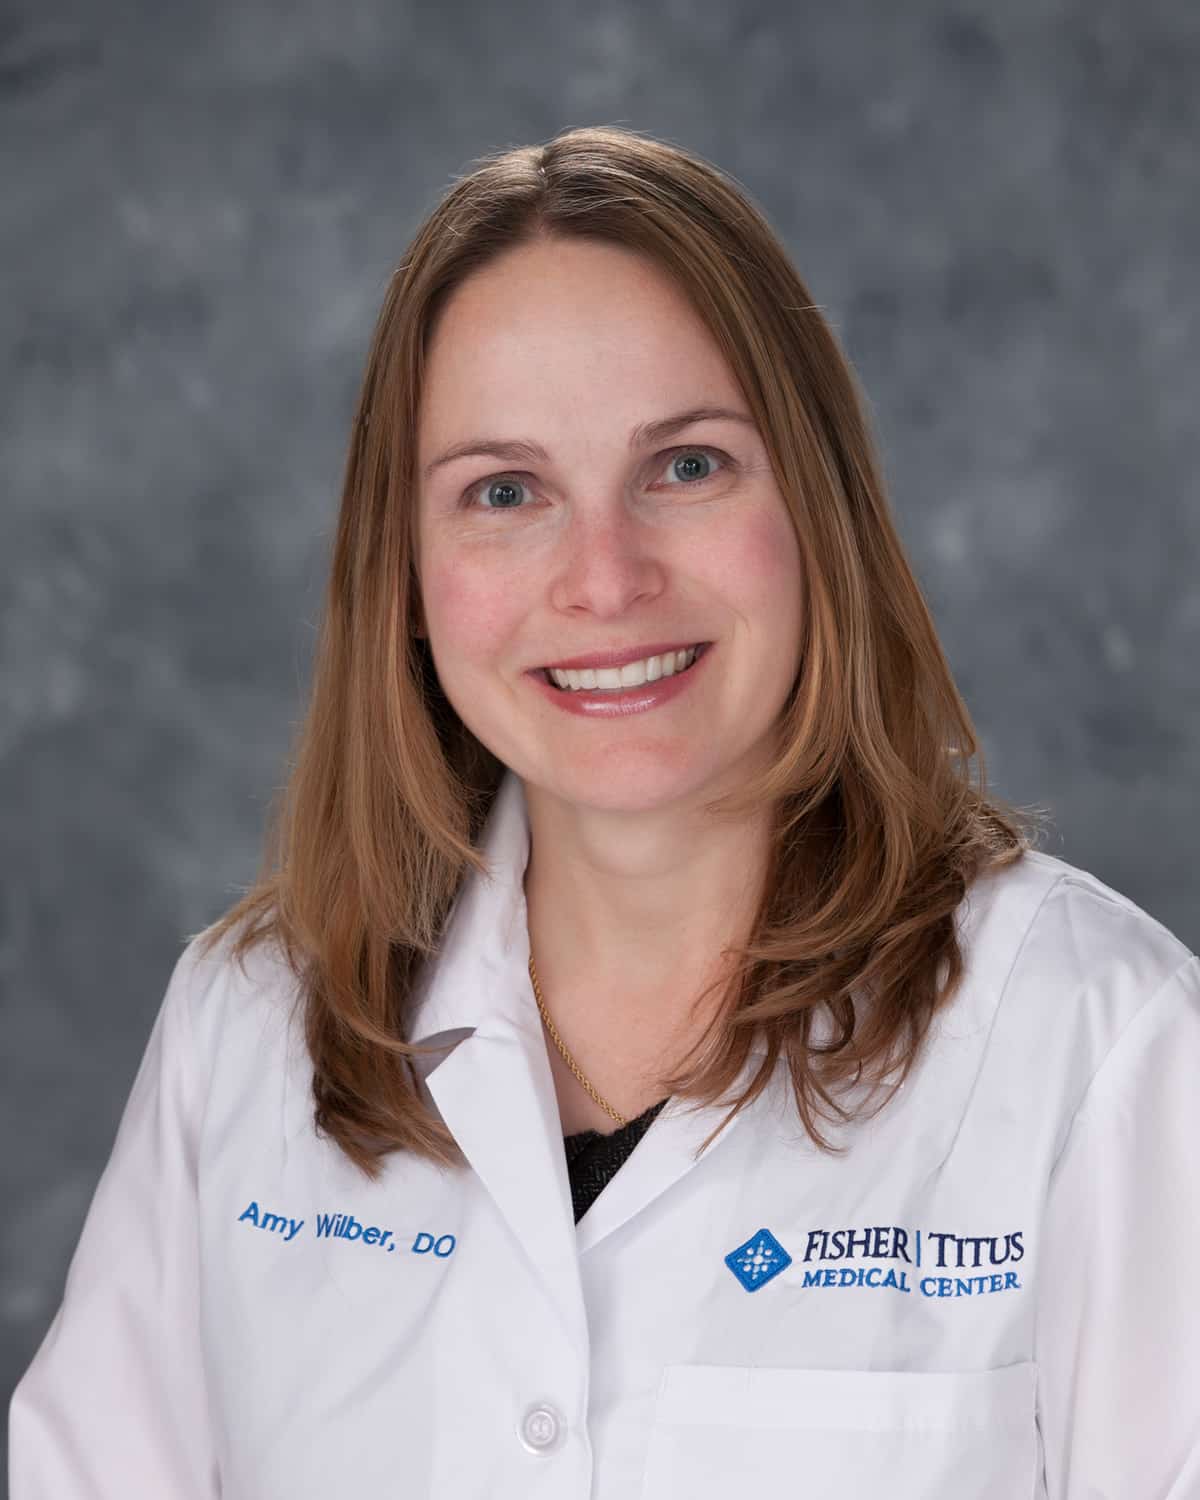 Dr. Amy Wilber, DO